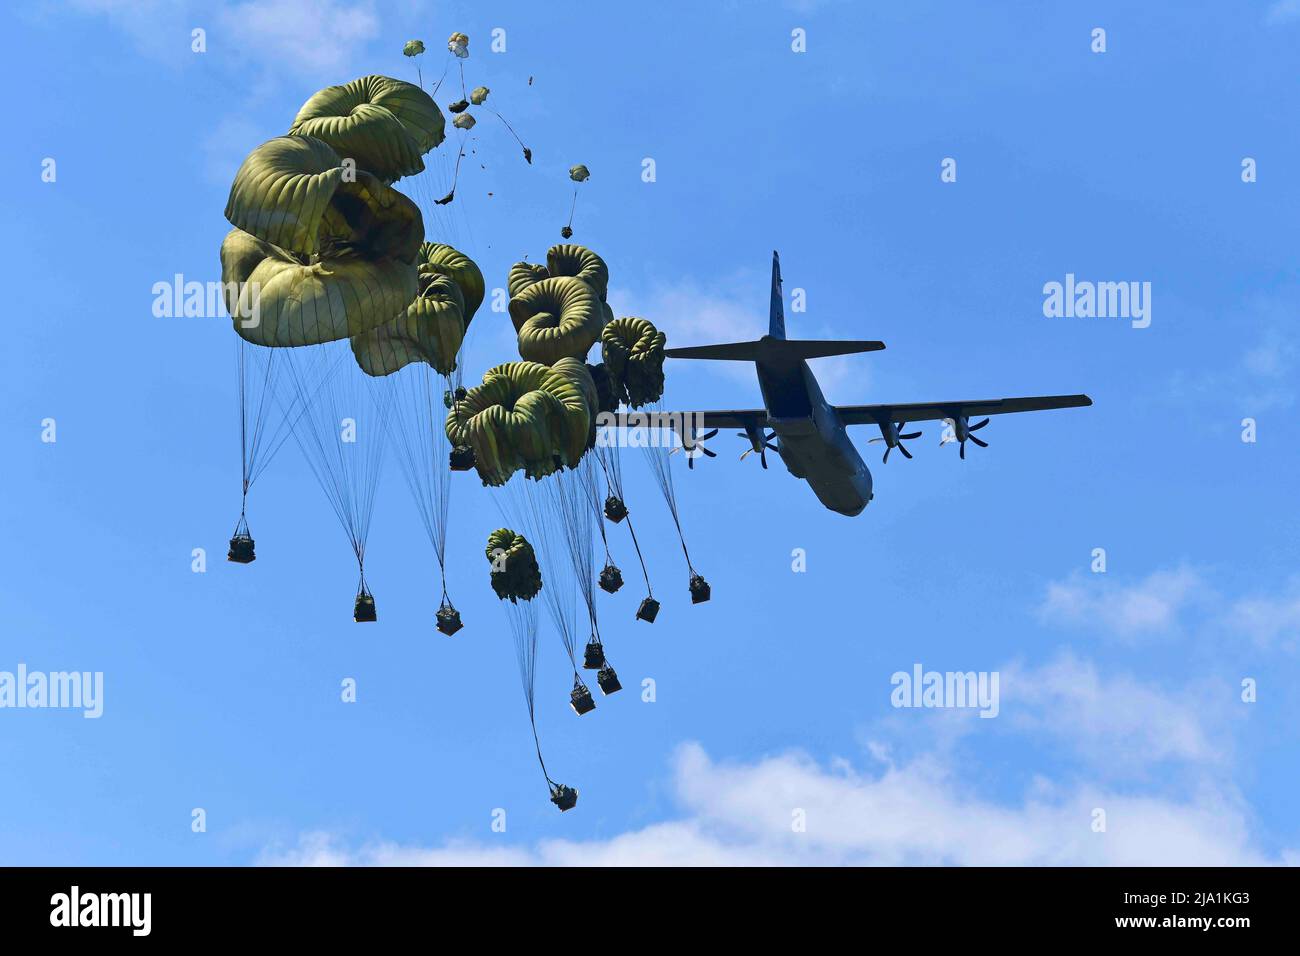 May 17, 2022 - Pordenone, Italy - U.S. Army paratroopers assigned to the Brigade Support Battalion, 173rd Airborne Brigade, release heavy drop packages with a U.S. Air Force 86th Air Wing C-130 Hercules aircraft onto Frida Drop Zone at Pordenone, Italy on May 17, 2022. The 173rd Airborne Brigade is the U.S. Army's Contingency Response Force in Europe, providing rapidly deployable forces to the USA European, African, and Central Command areas of responsibility. Forward deployed across Italy and Germany, the brigade routinely trains alongside NATO allies and partners to build partnerships and st Stock Photo